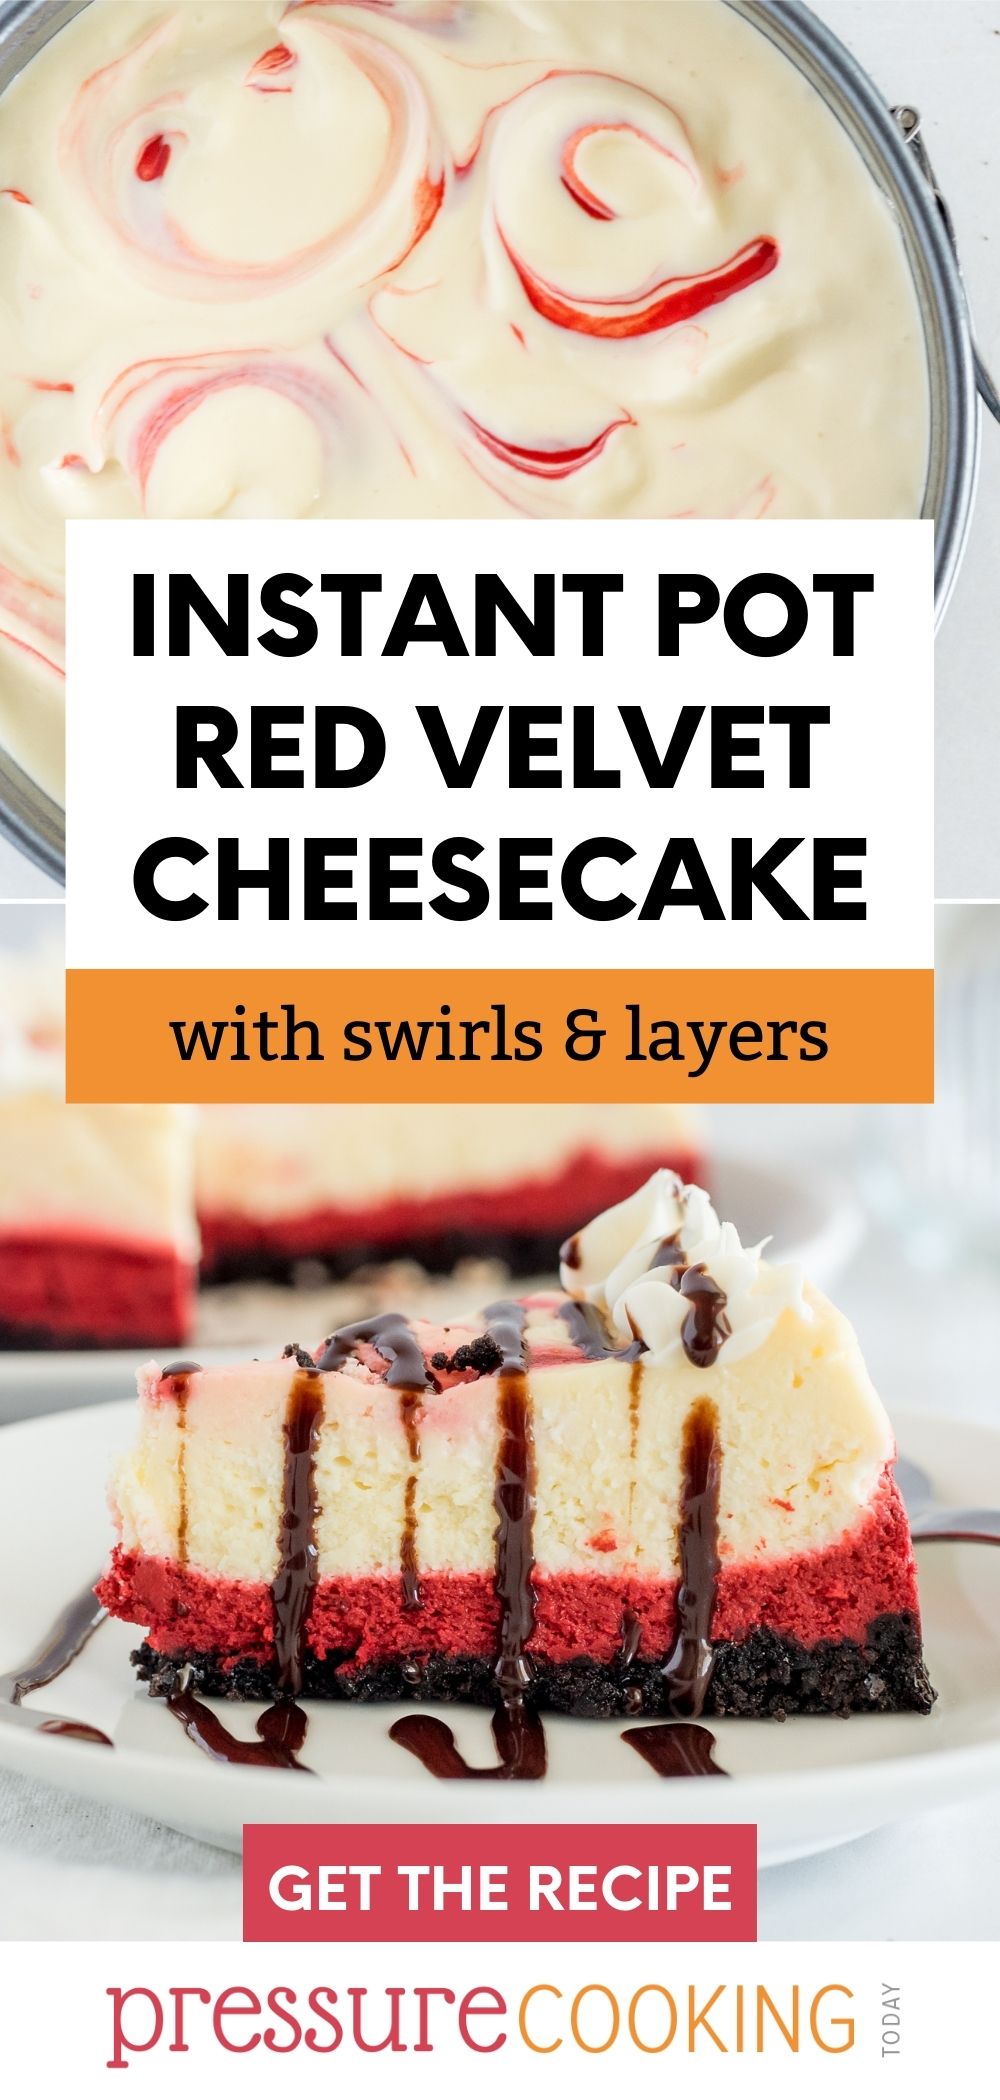 a pinterest button that reads "Instant Pot Red Velvet Cheesecake with swirls and layers" over a photo of the cheesecake batter swirled in a pan and a lower photo that shows a slice of cheesecake with the red layer and the chocolate drizzled over the top via @PressureCook2da